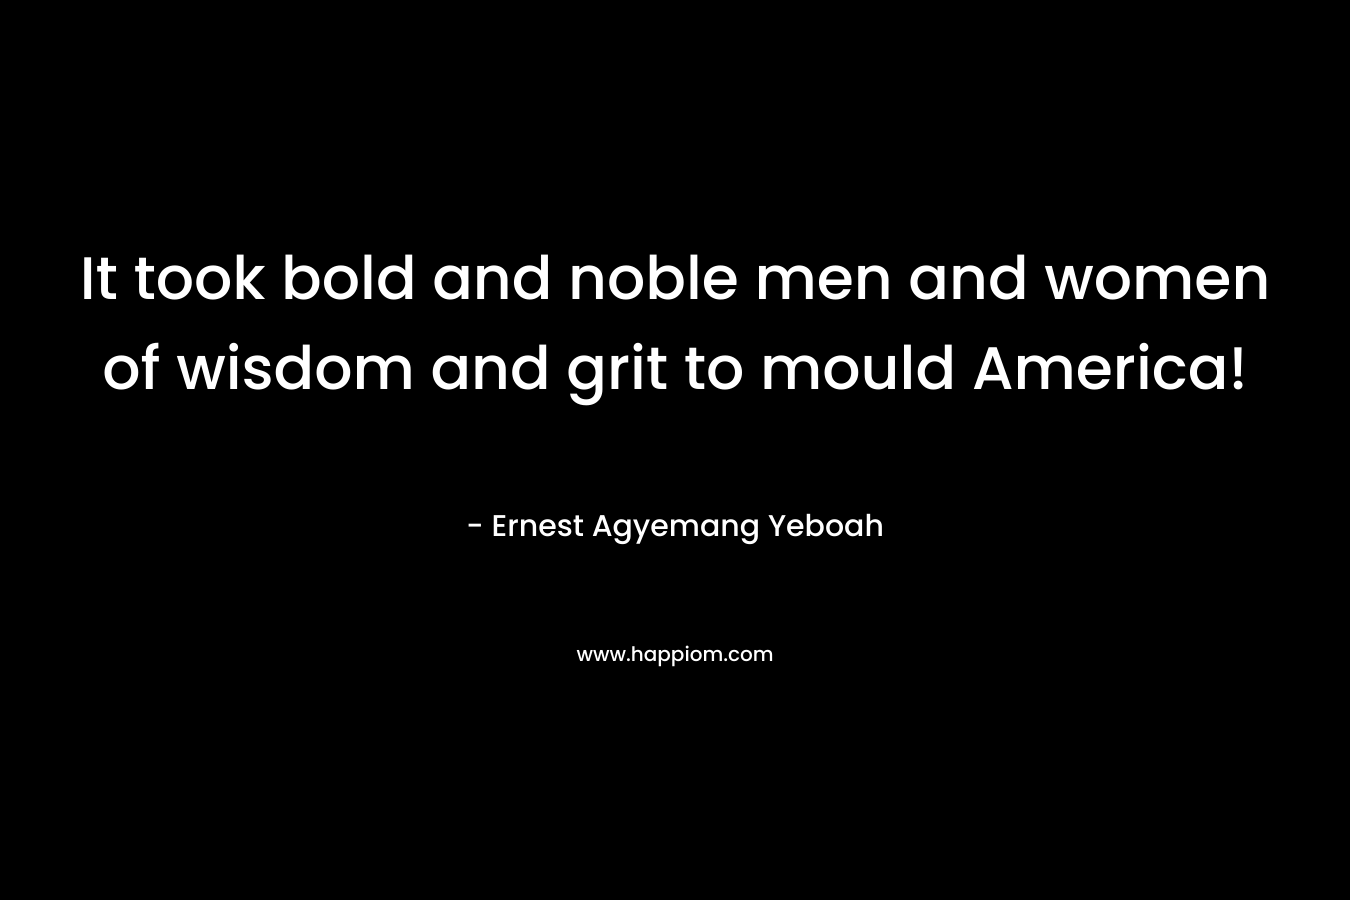 It took bold and noble men and women of wisdom and grit to mould America! – Ernest Agyemang Yeboah